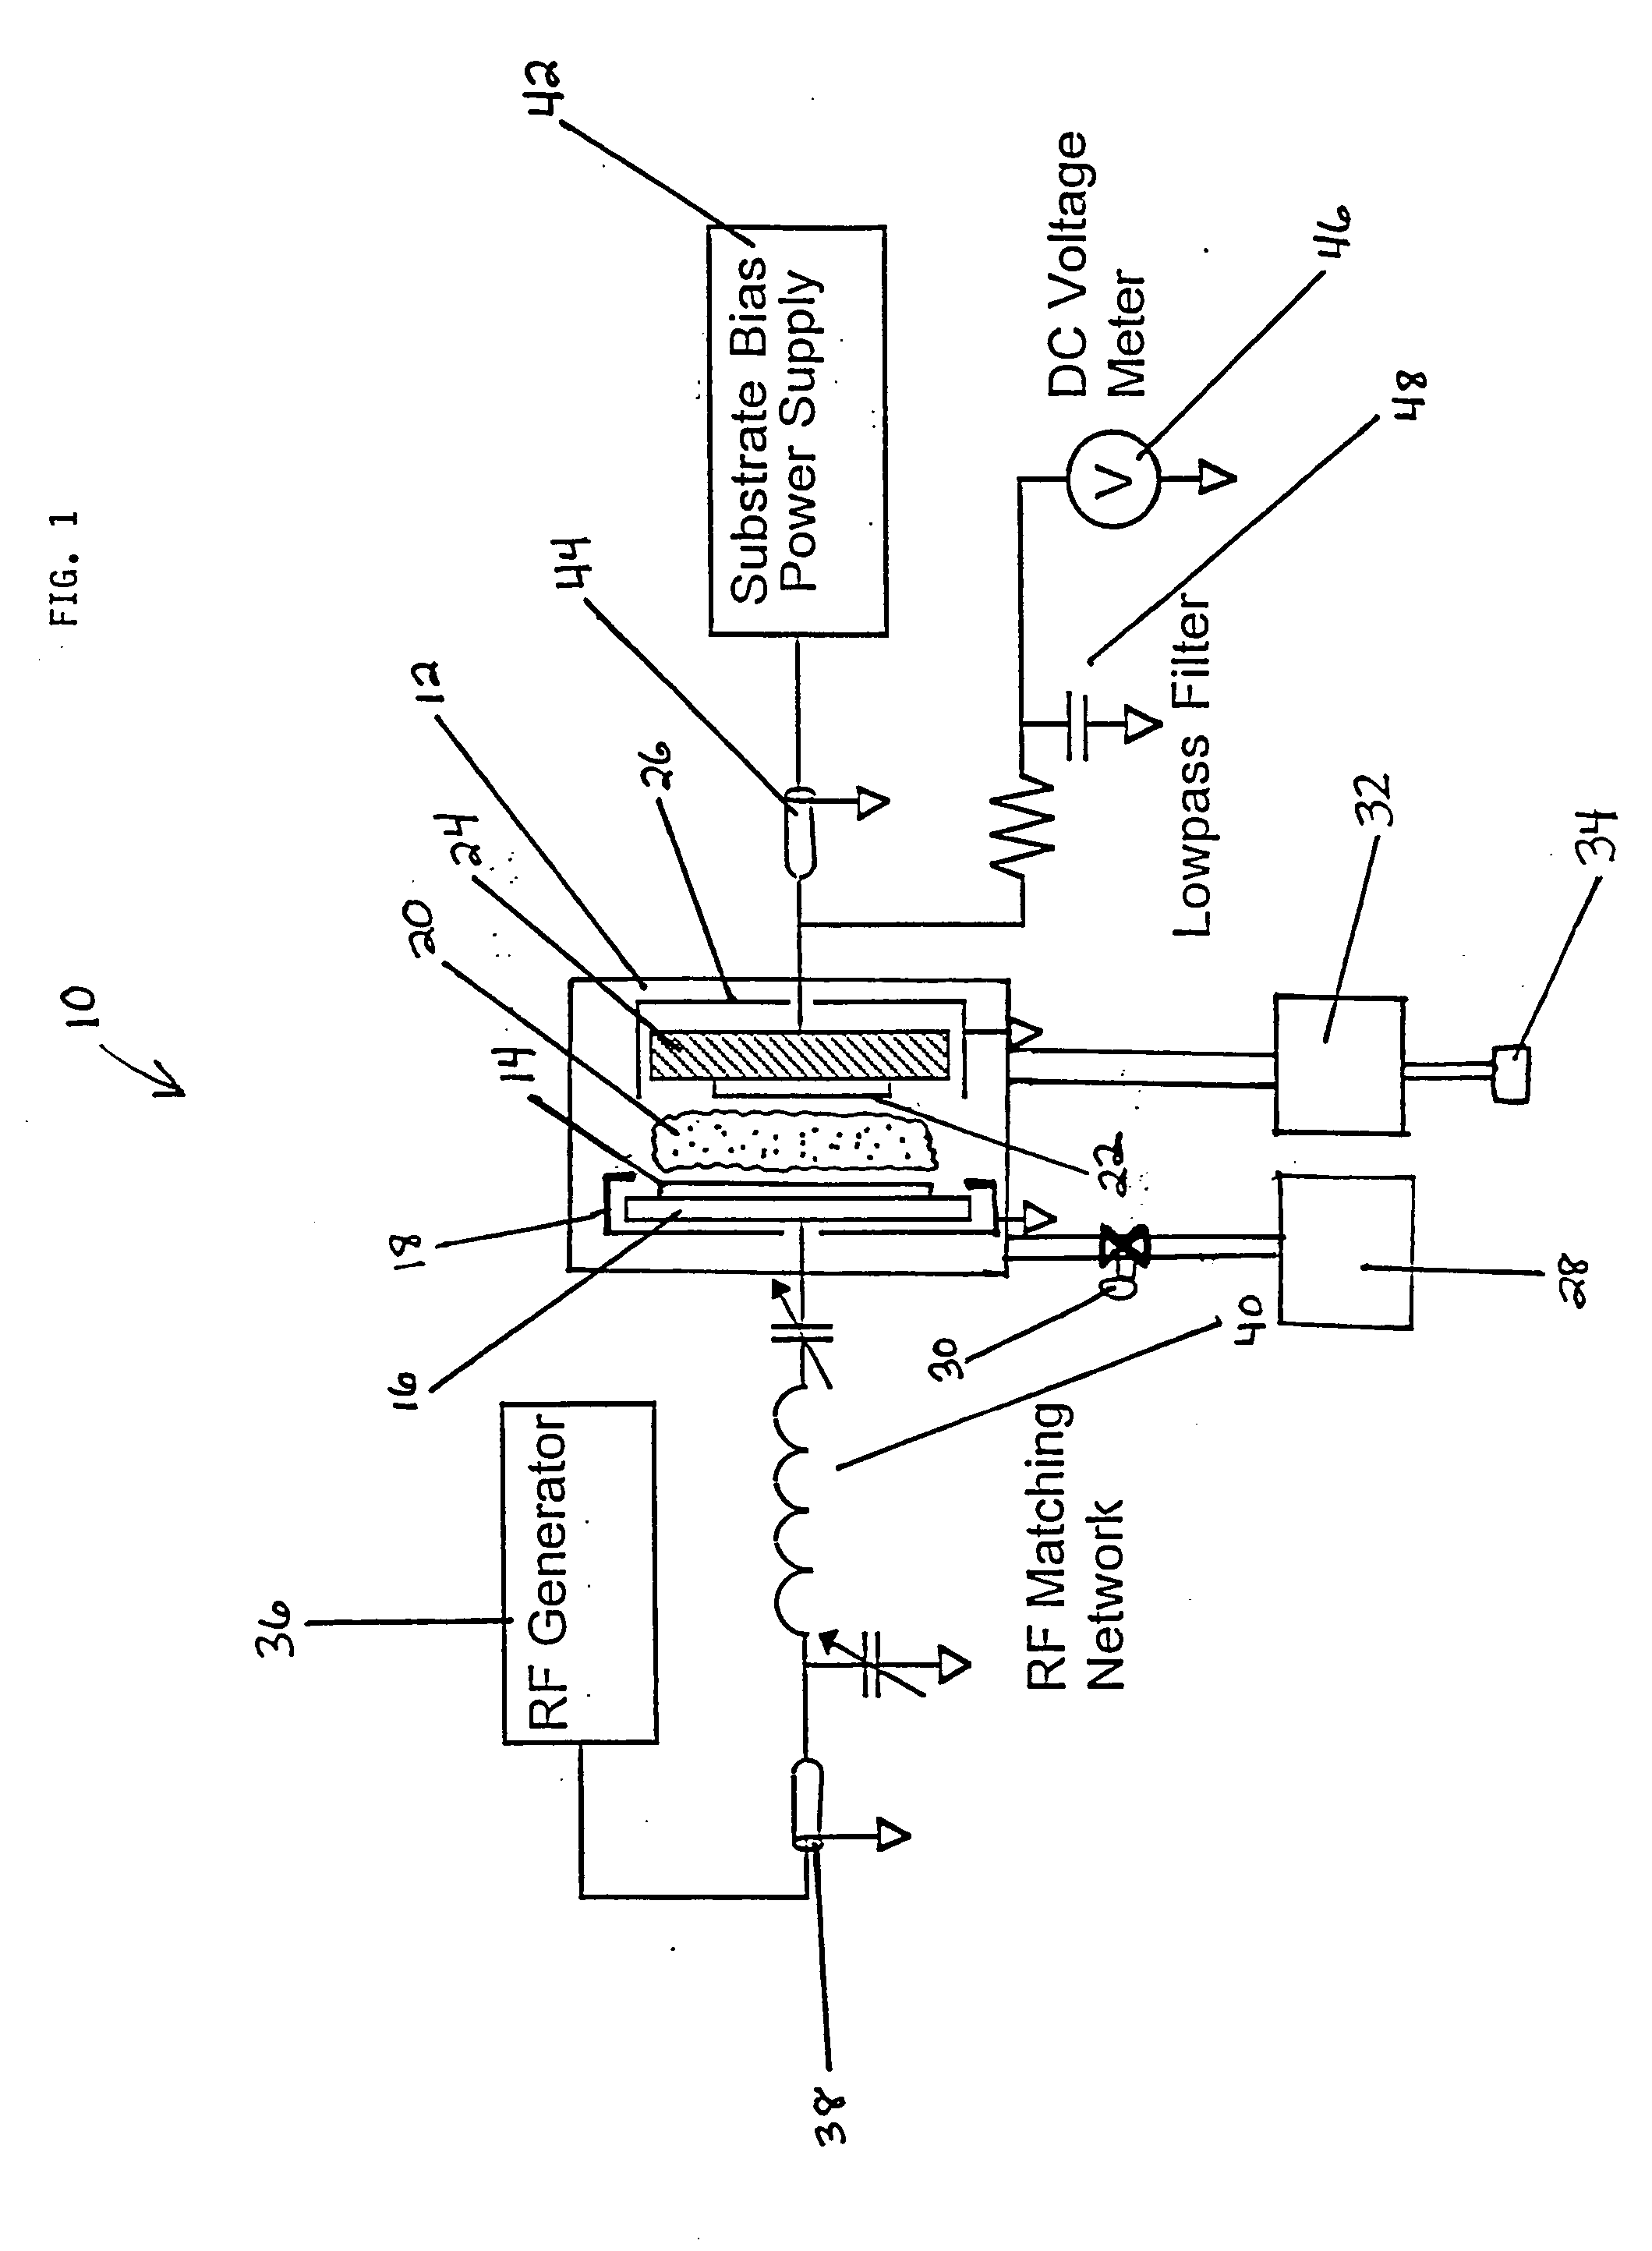 Method for producing substantially planar films